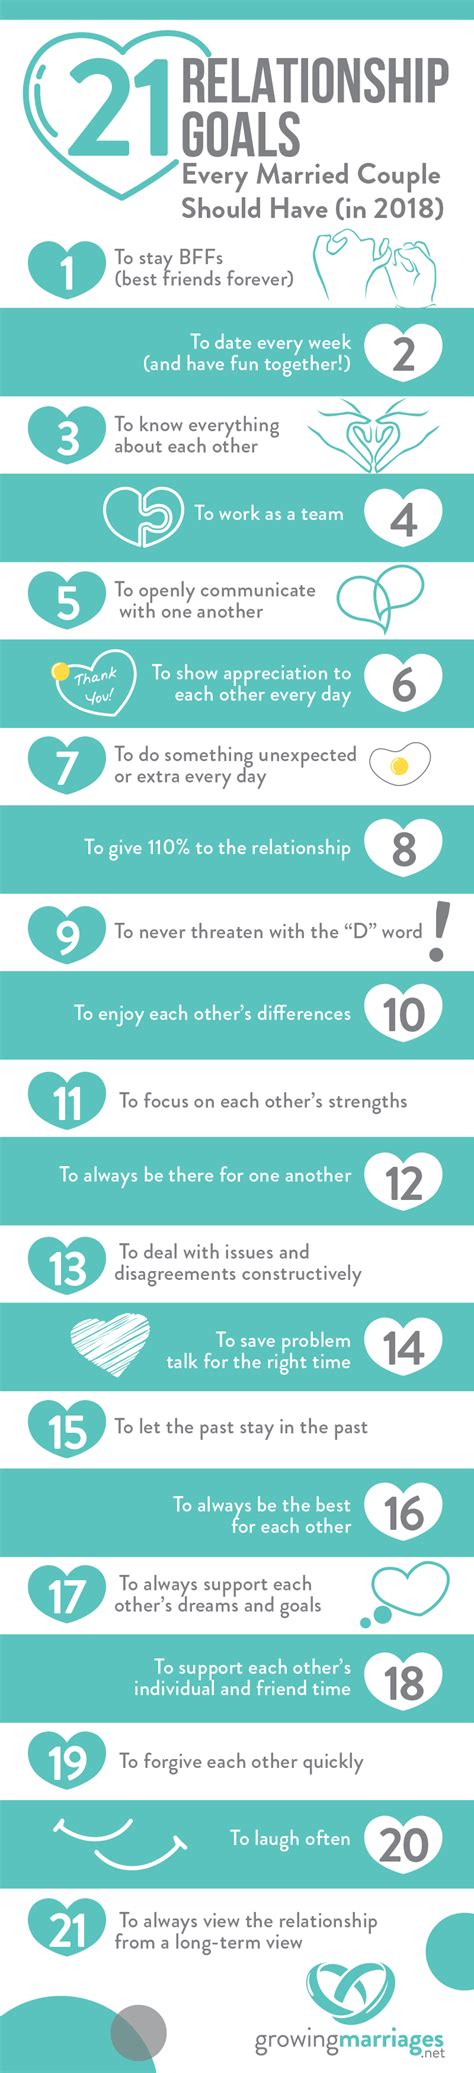 21 relationship goals every married couple should have in 2018 [infographic] growing marriages